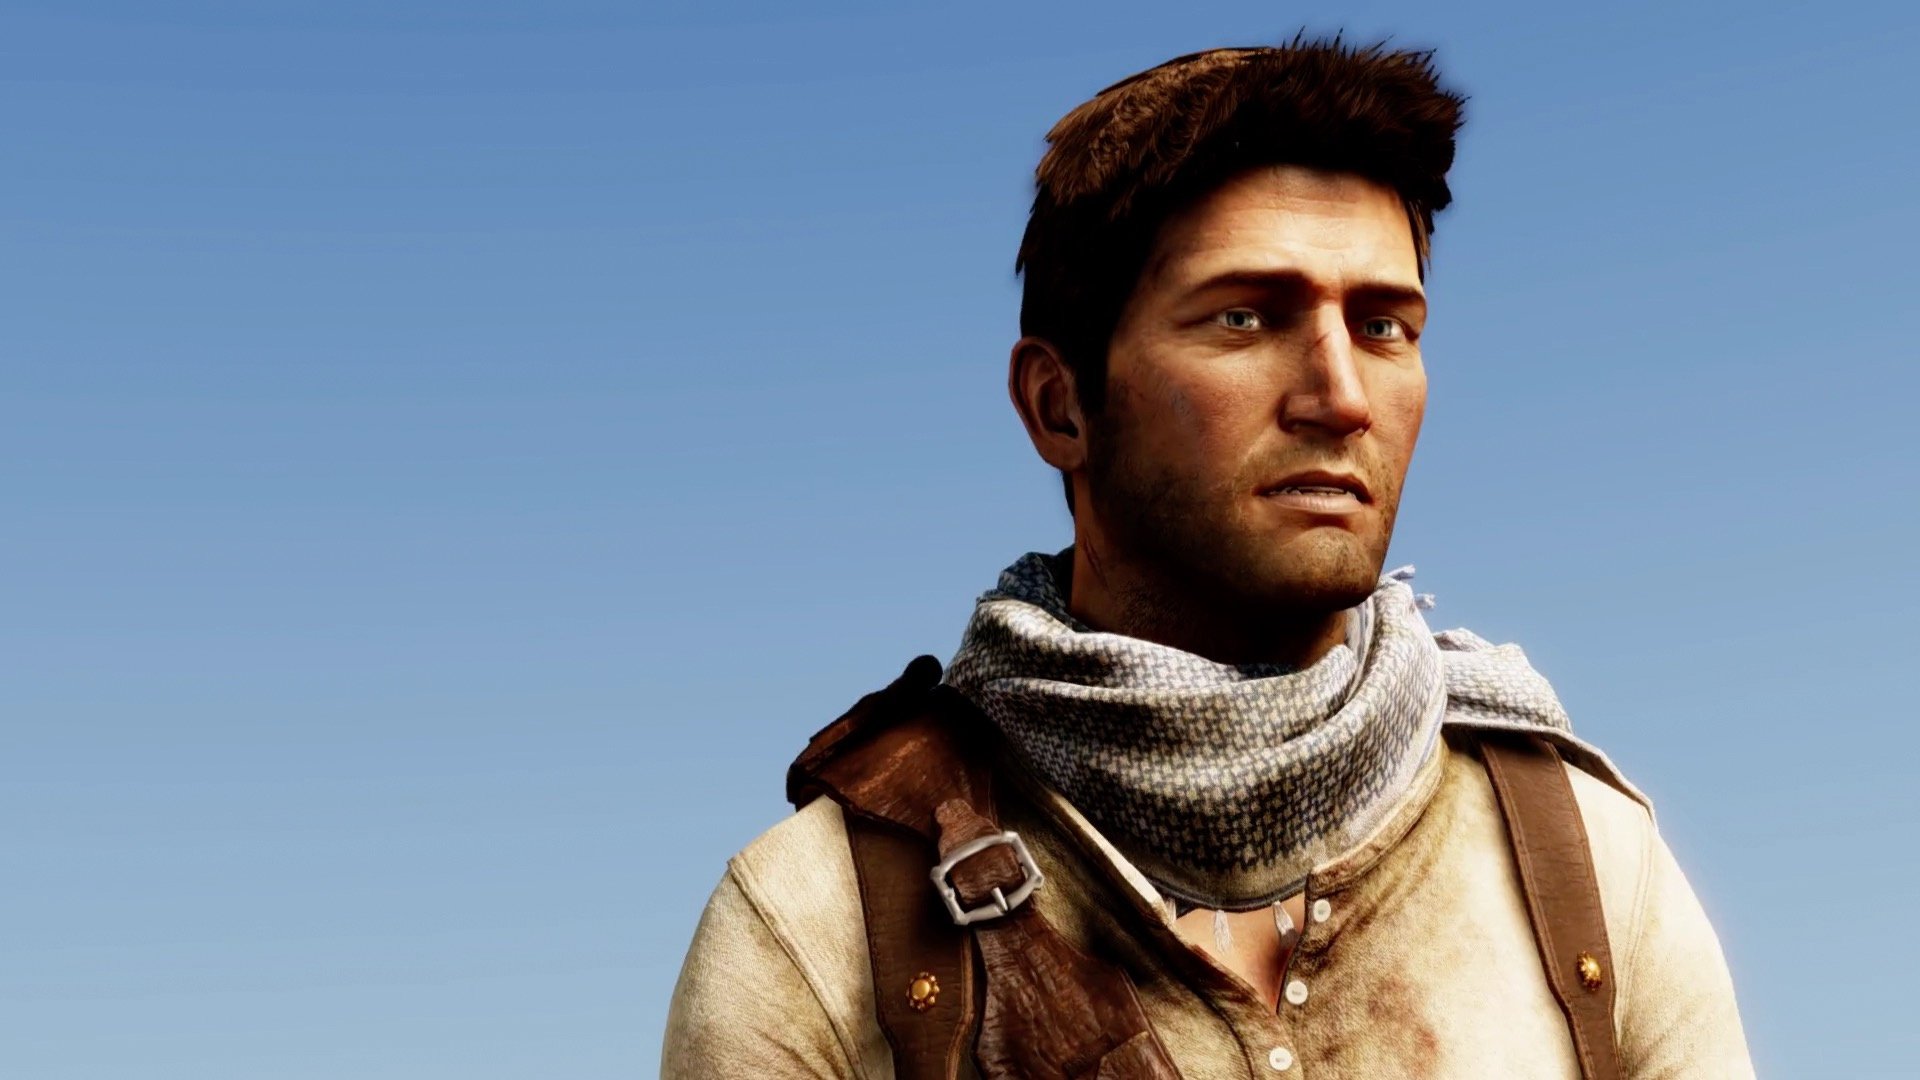 Uncharted 3 - 60FPS All Cutscenes Movie 1080p HD (PS4) Nathan